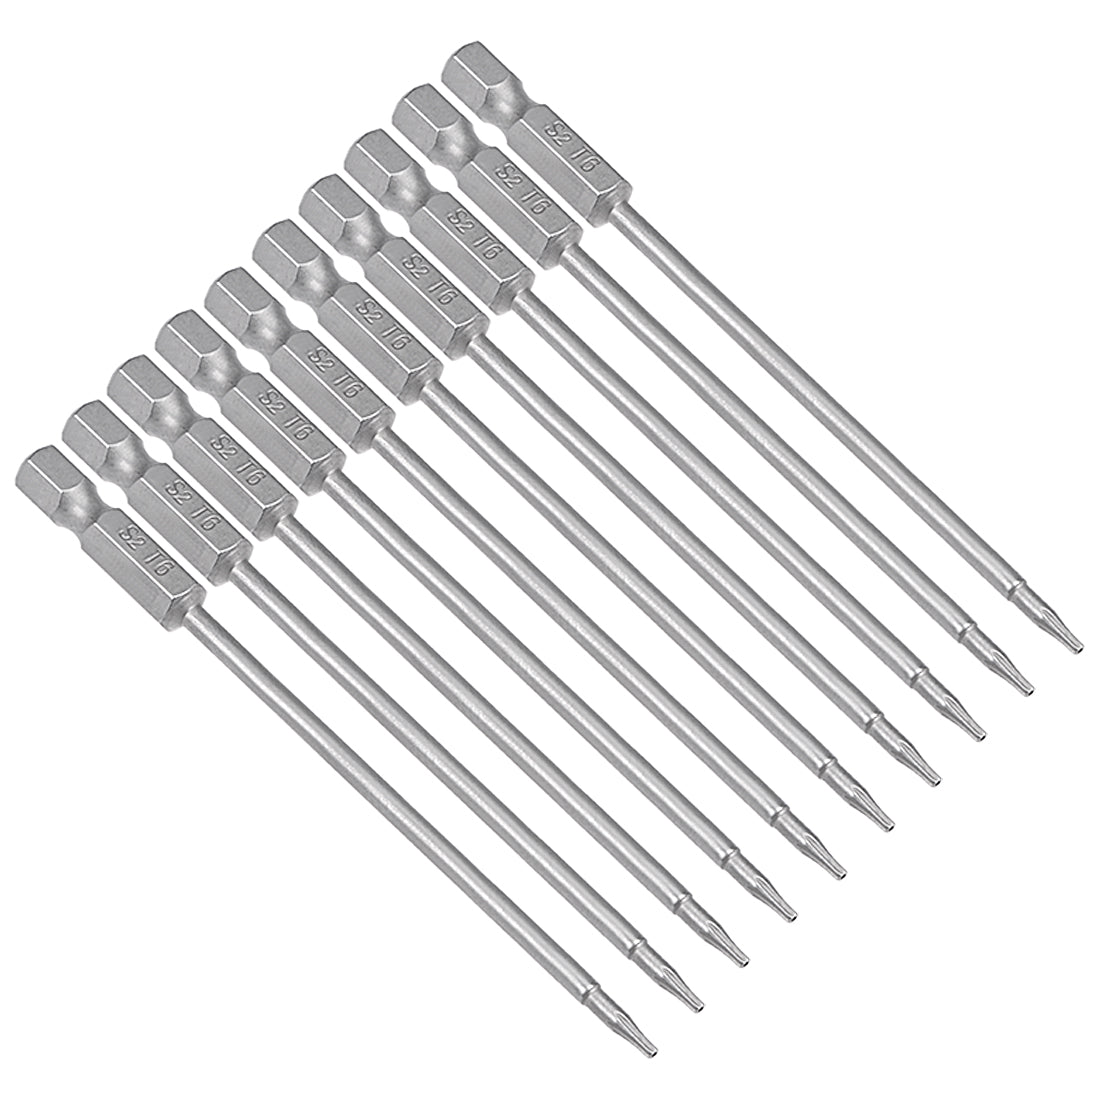 uxcell Uxcell 10 Pcs Magnetic Torx Screwdriver Bits, Hex Shank S2 Security Tamper Proof Screw Driver Kit Tools